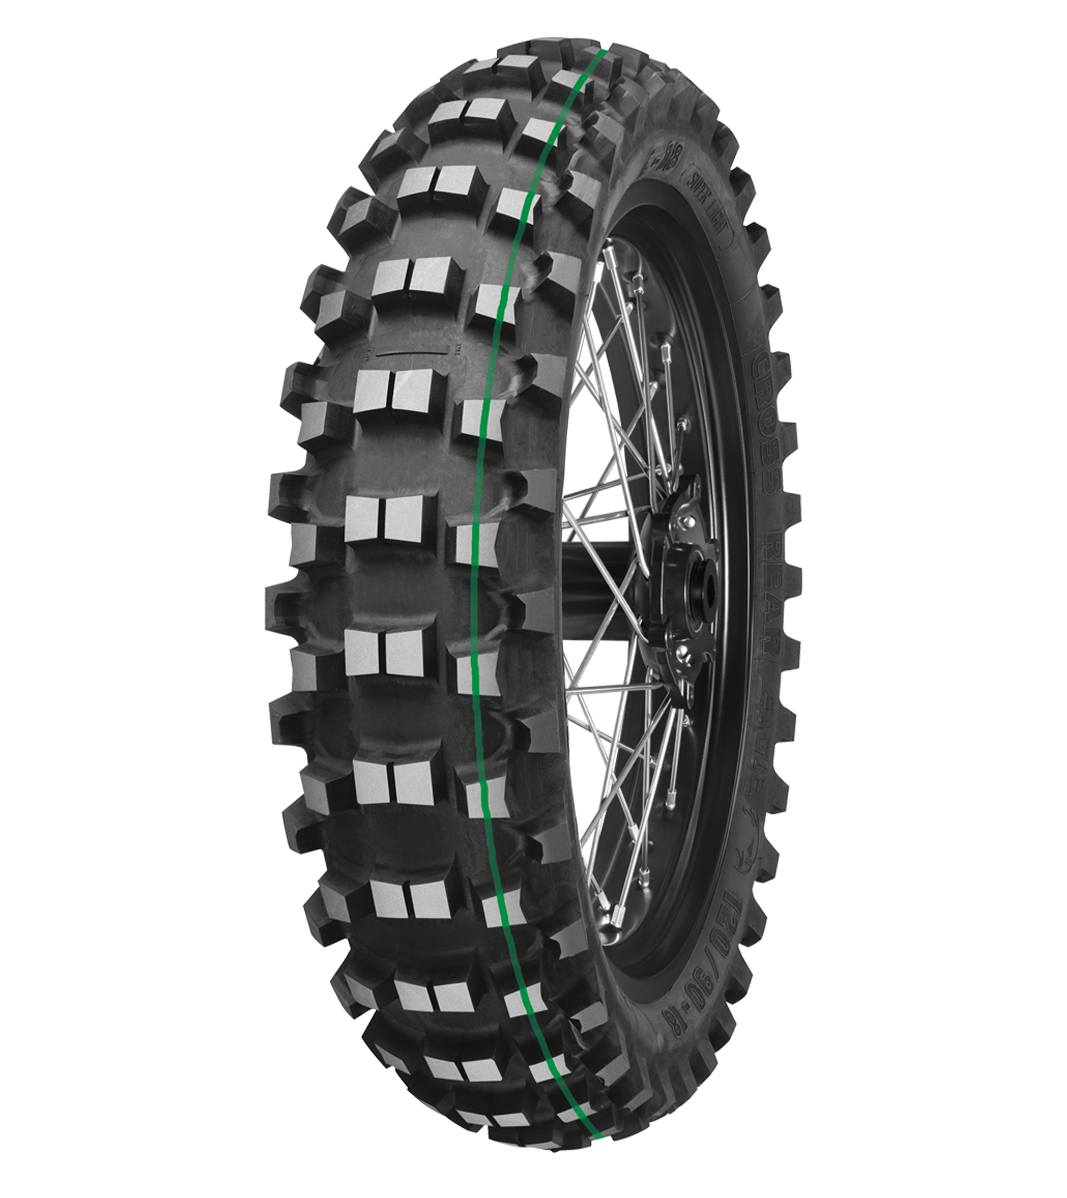 Mitas C-18 EAGLE 120/90-18 Enduro Competition Off-Road SUPER LIGHT 65R Green Tube Rear Tire, 226557, 120/90-18, C-18 Eagle, Enduro, Enduro Competition, Off-Road, Rear, Tires - Imported and distributed in North & South America by Lindeco Genuine Powersports - Premier Powersports Equipment and Accessories for Motorcycle Enthusiasts, Professional Riders and Dealers.